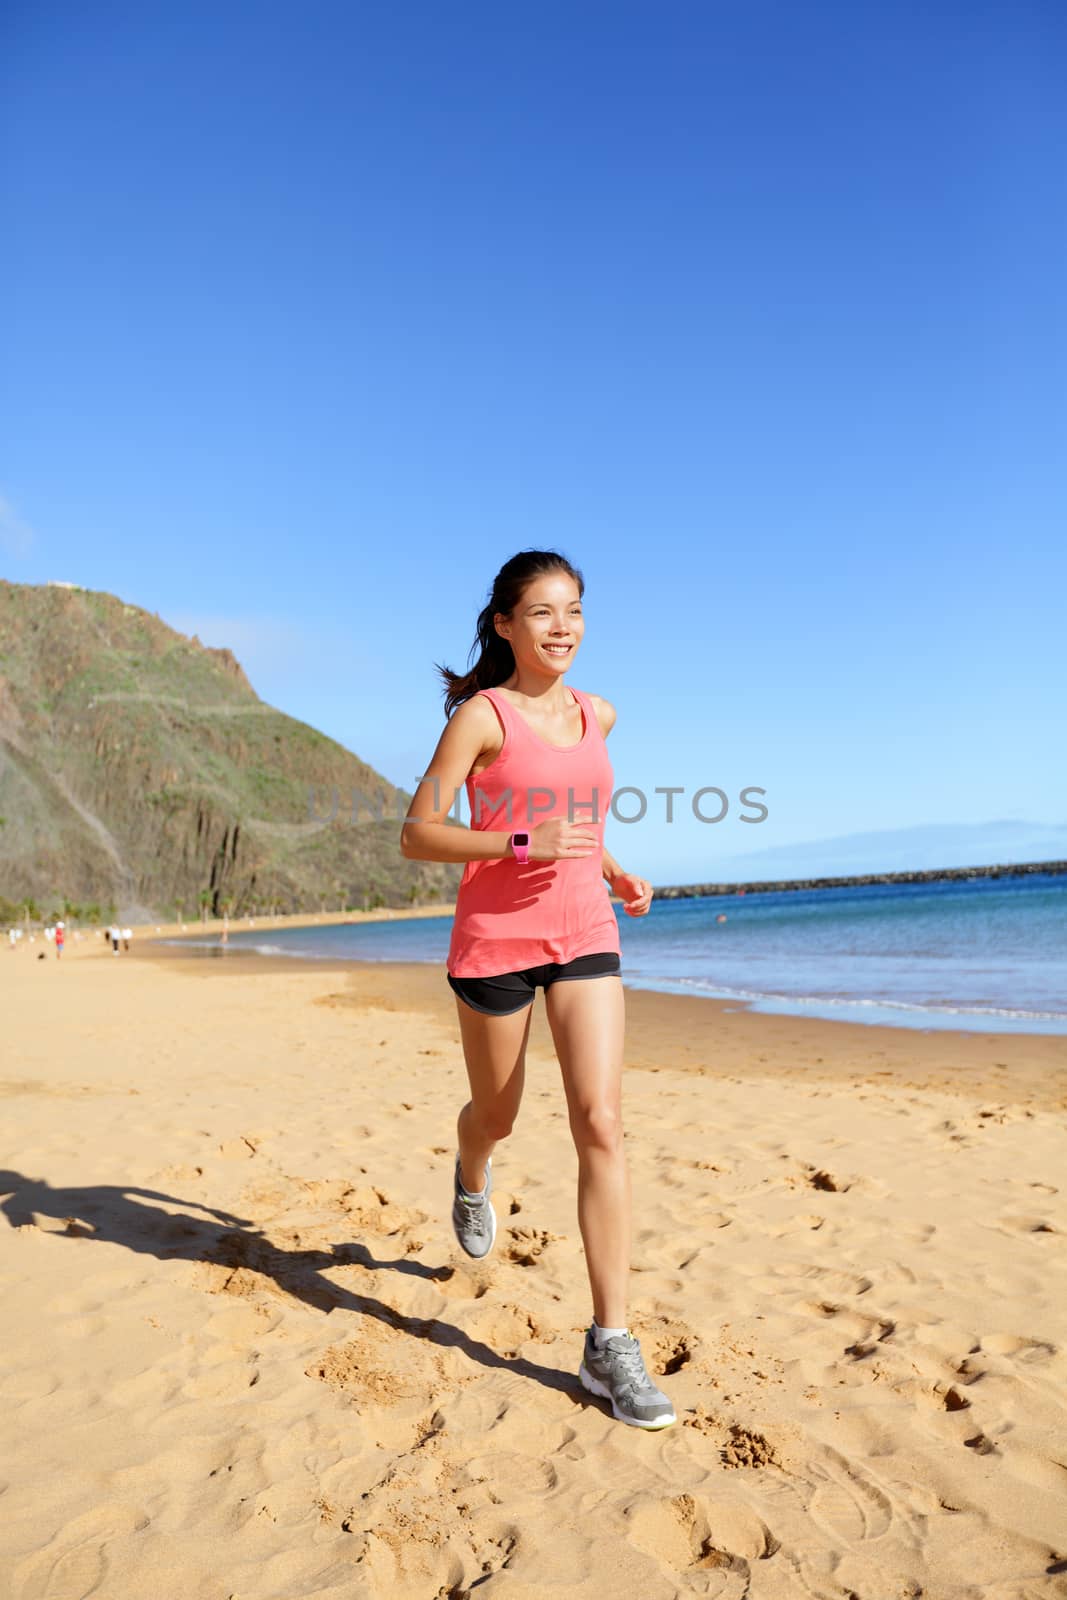 Runner sports athlete running woman on beach sweating and jogging. Fit exercising female fitness model working out training for marathon run. Biracial Asian Caucasian sports girl.